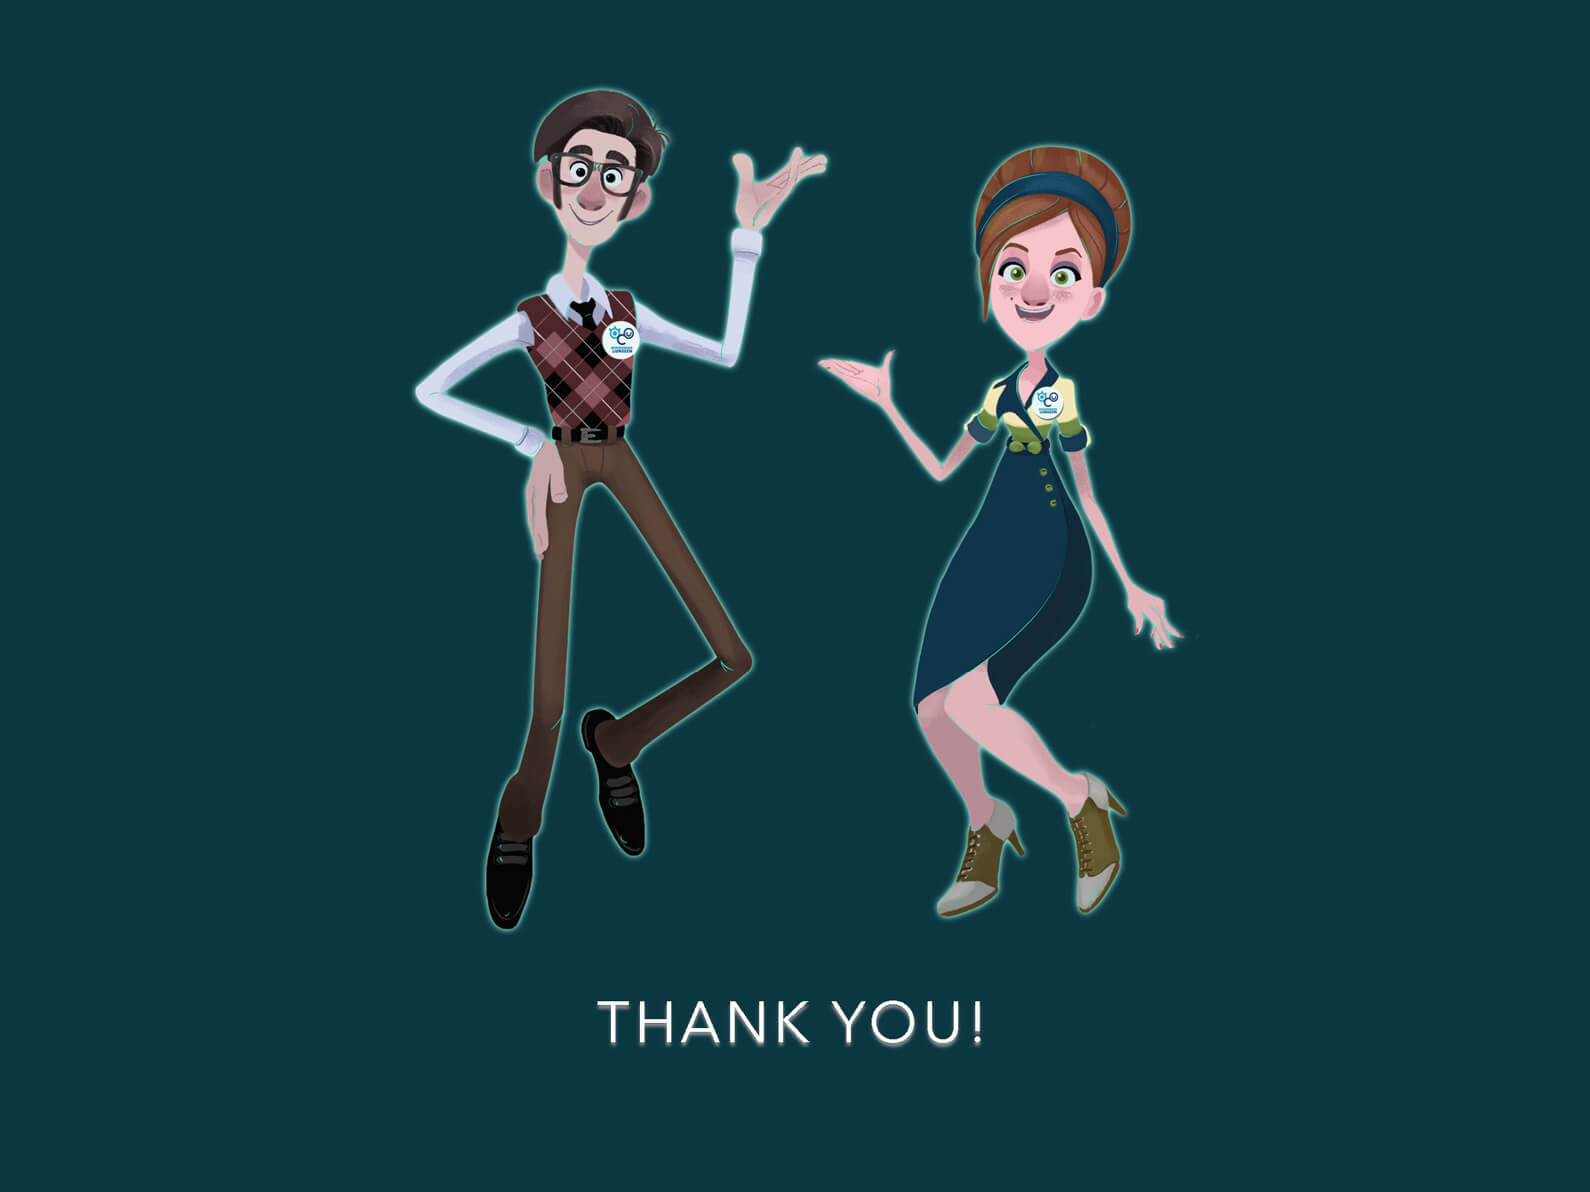 Floating man and woman against a dark green background waving at the viewer. "THANK YOU!" seen in white text below.